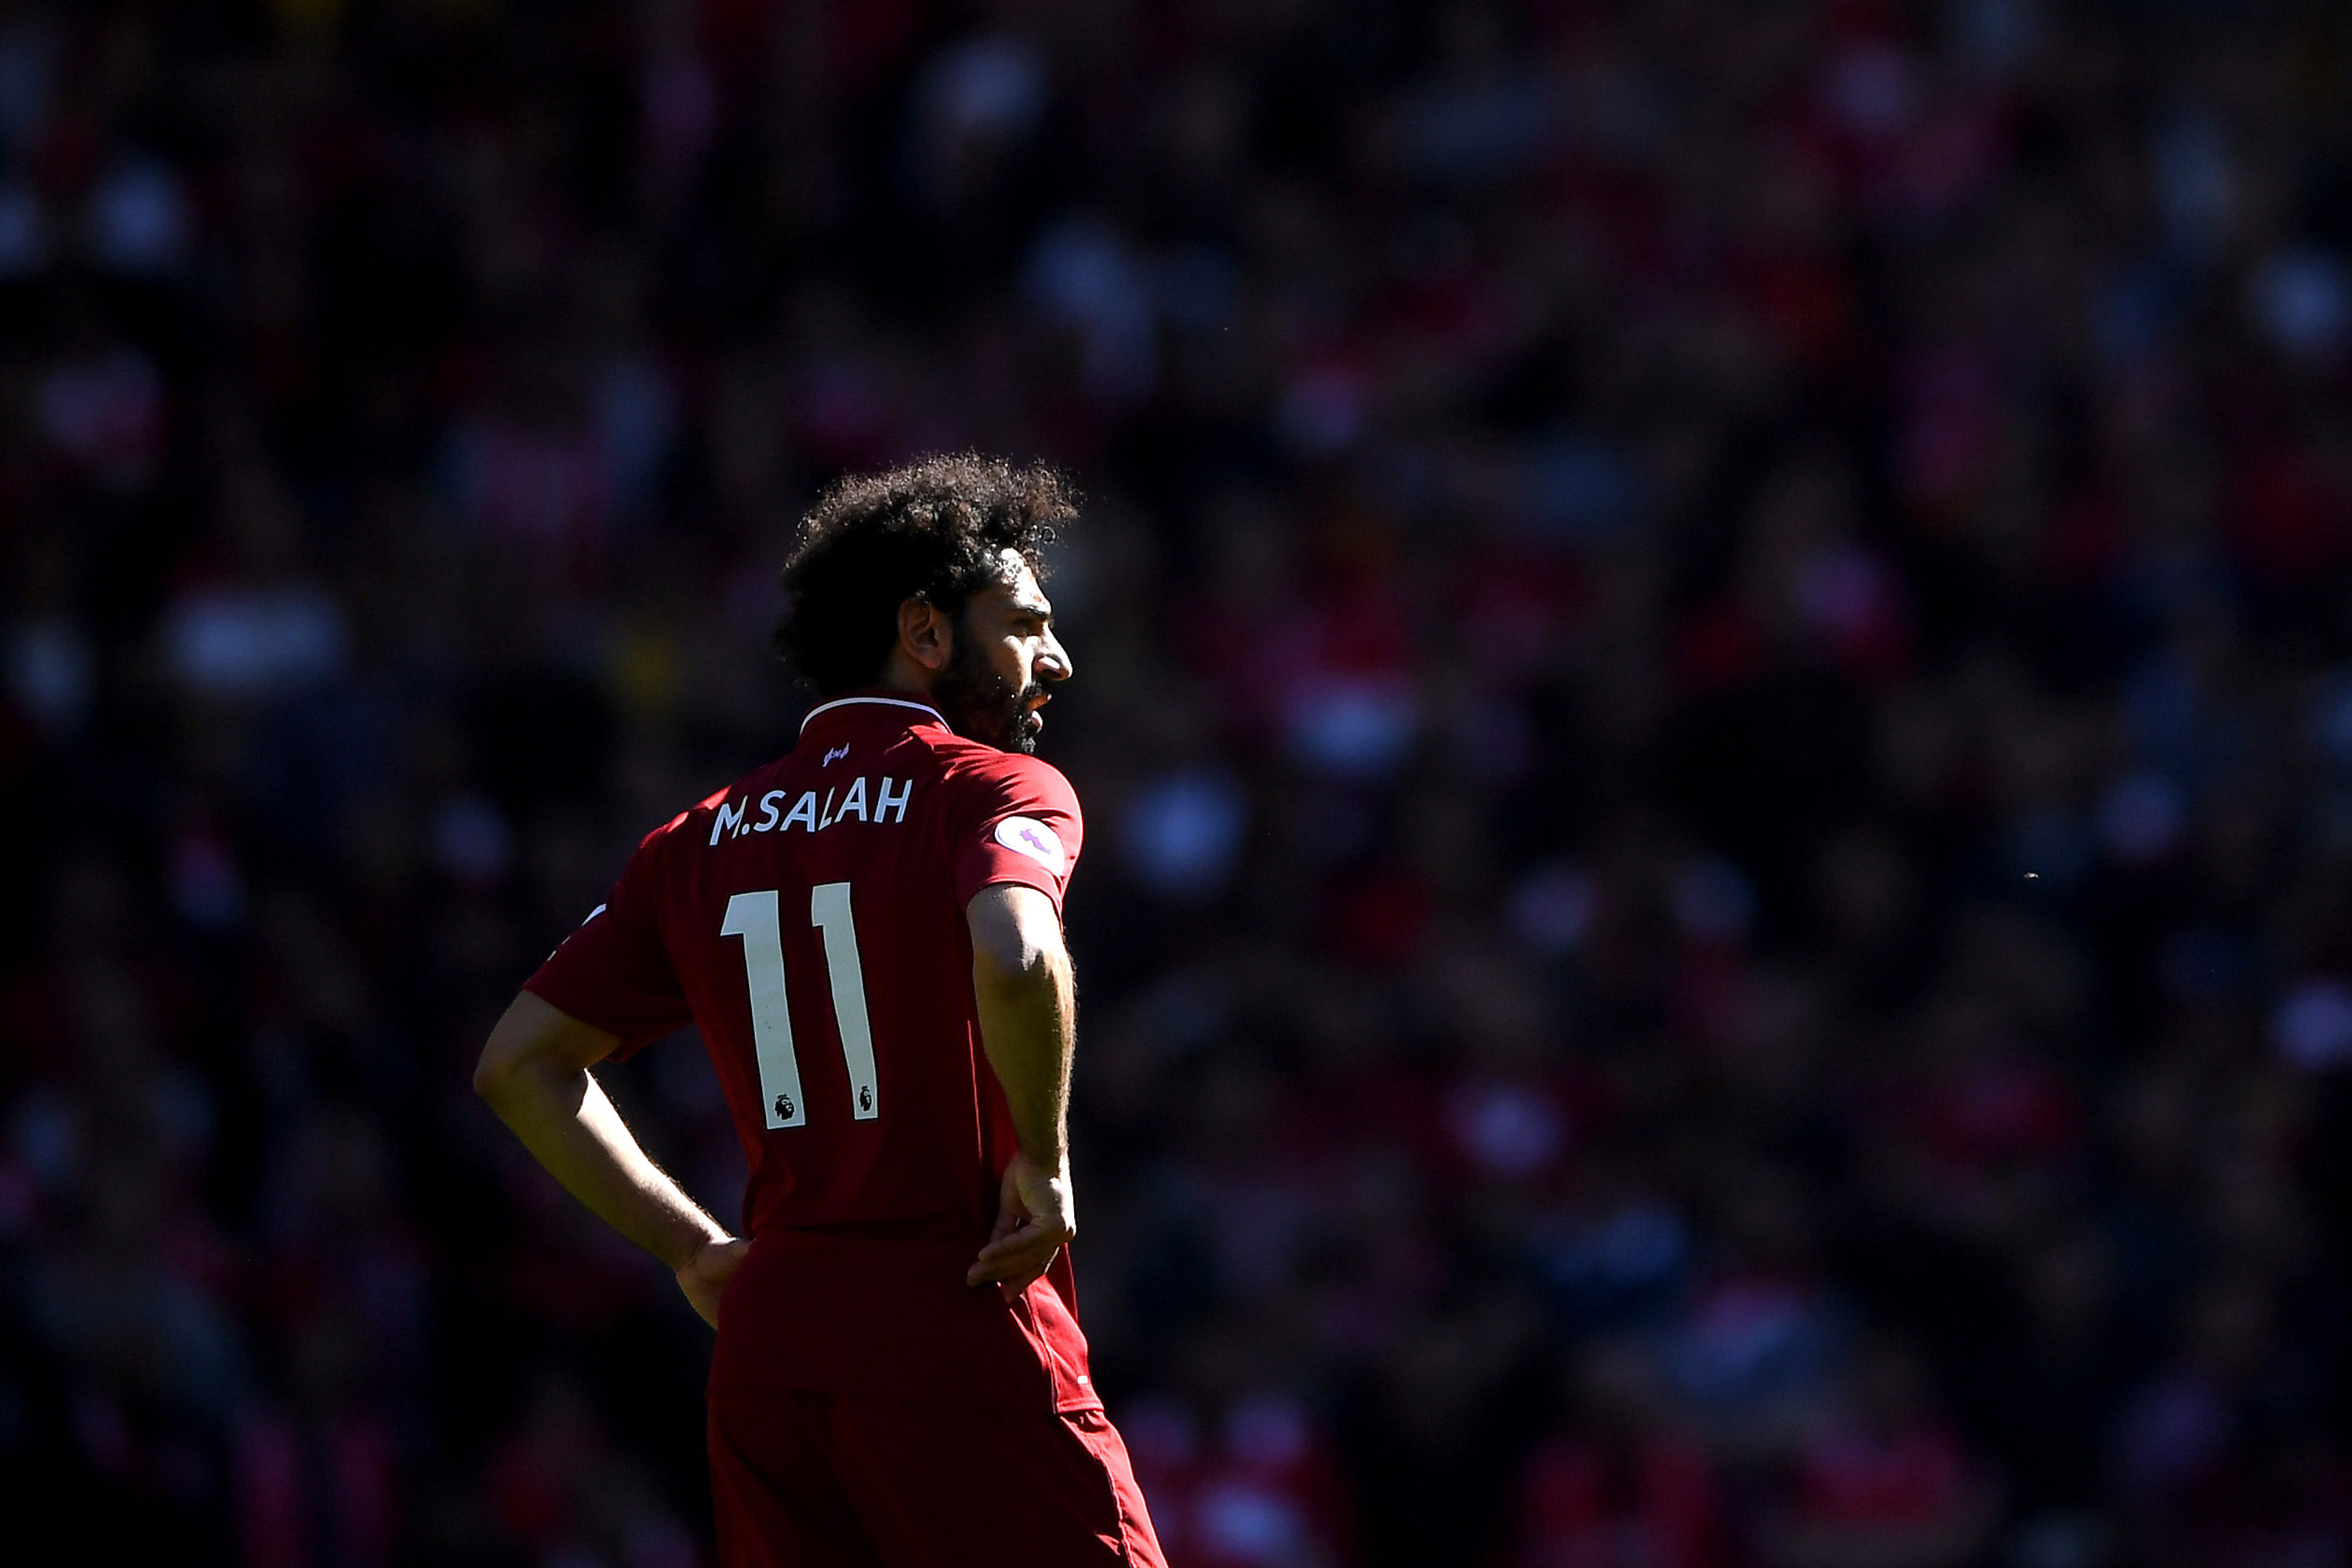 LIVERPOOL, ENGLAND - MAY 12: Mohamed Salah of Liverpool reacts during the Premier League match between Liverpool FC and Wolverhampton Wanderers at Anfield on May 12, 2019 in Liverpool, United Kingdom. (Photo by Laurence Griffiths/Getty Images)